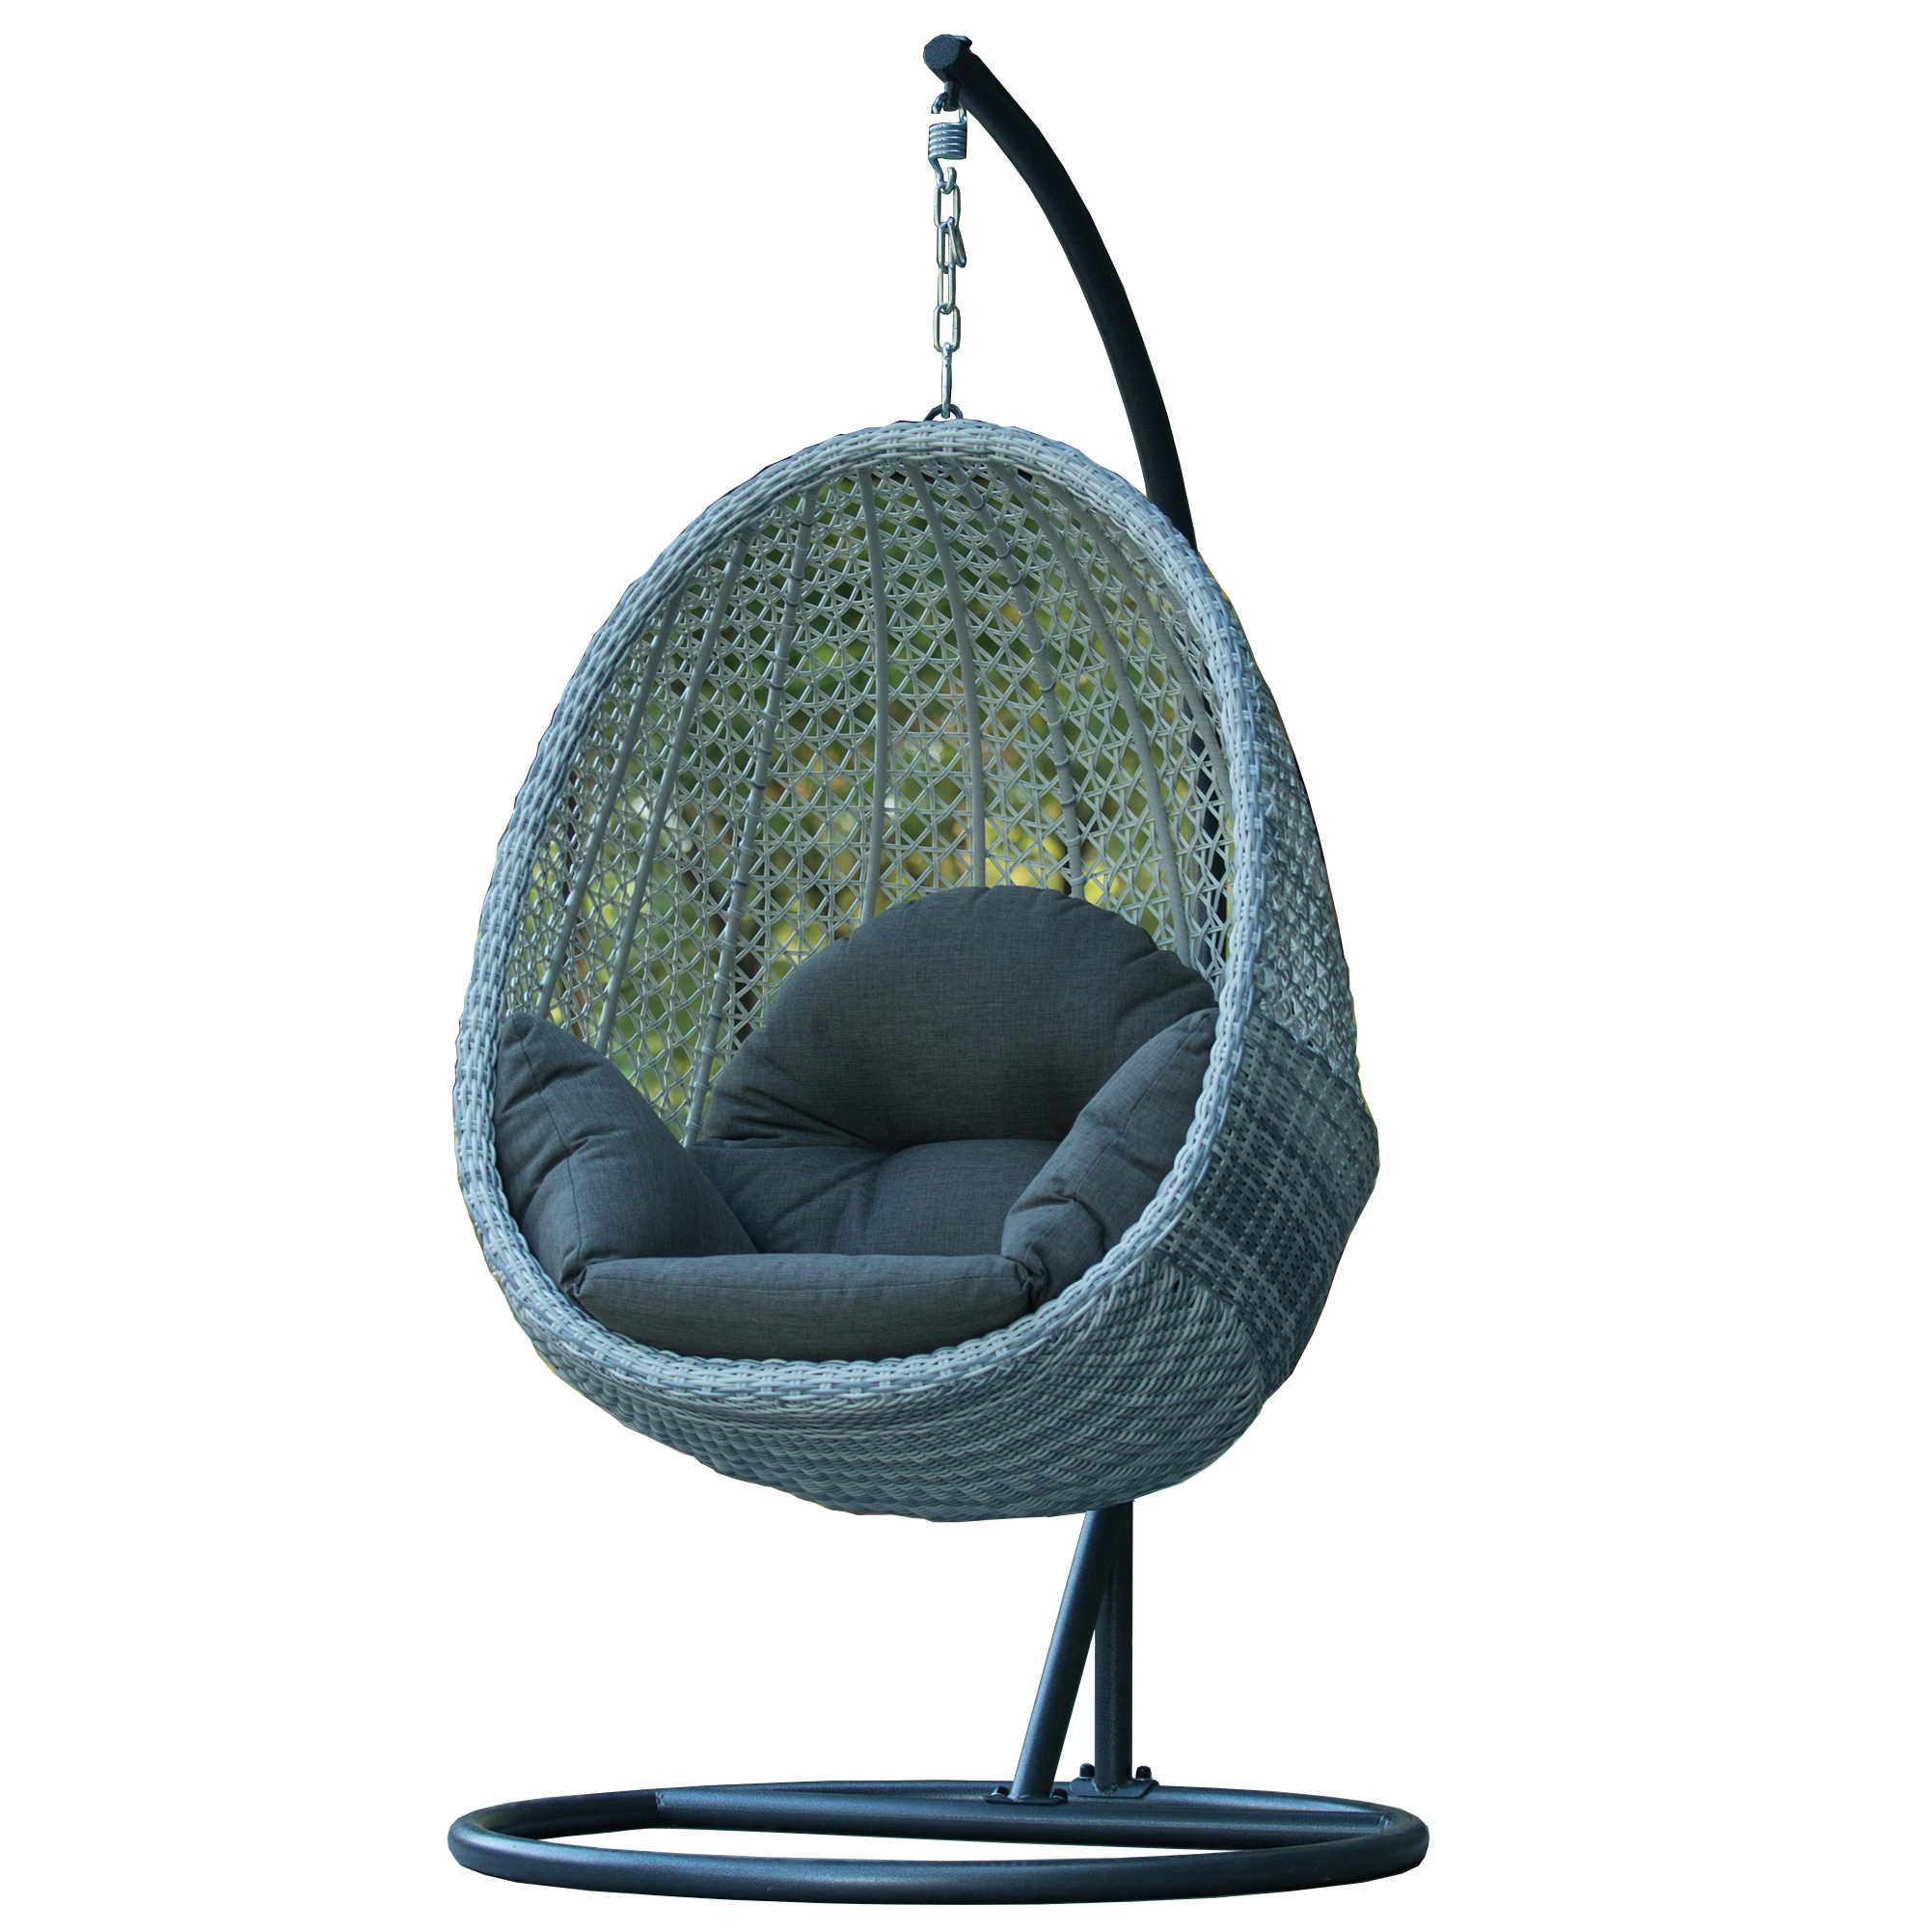 Indoor Outdoor Rattan Aluminum Egg Shape Swing Chair With Stand And Cushion Buy Cocoon Chair Cocoon Hanging Chair Swing Rattan Egg Chair Product On Alibaba Com